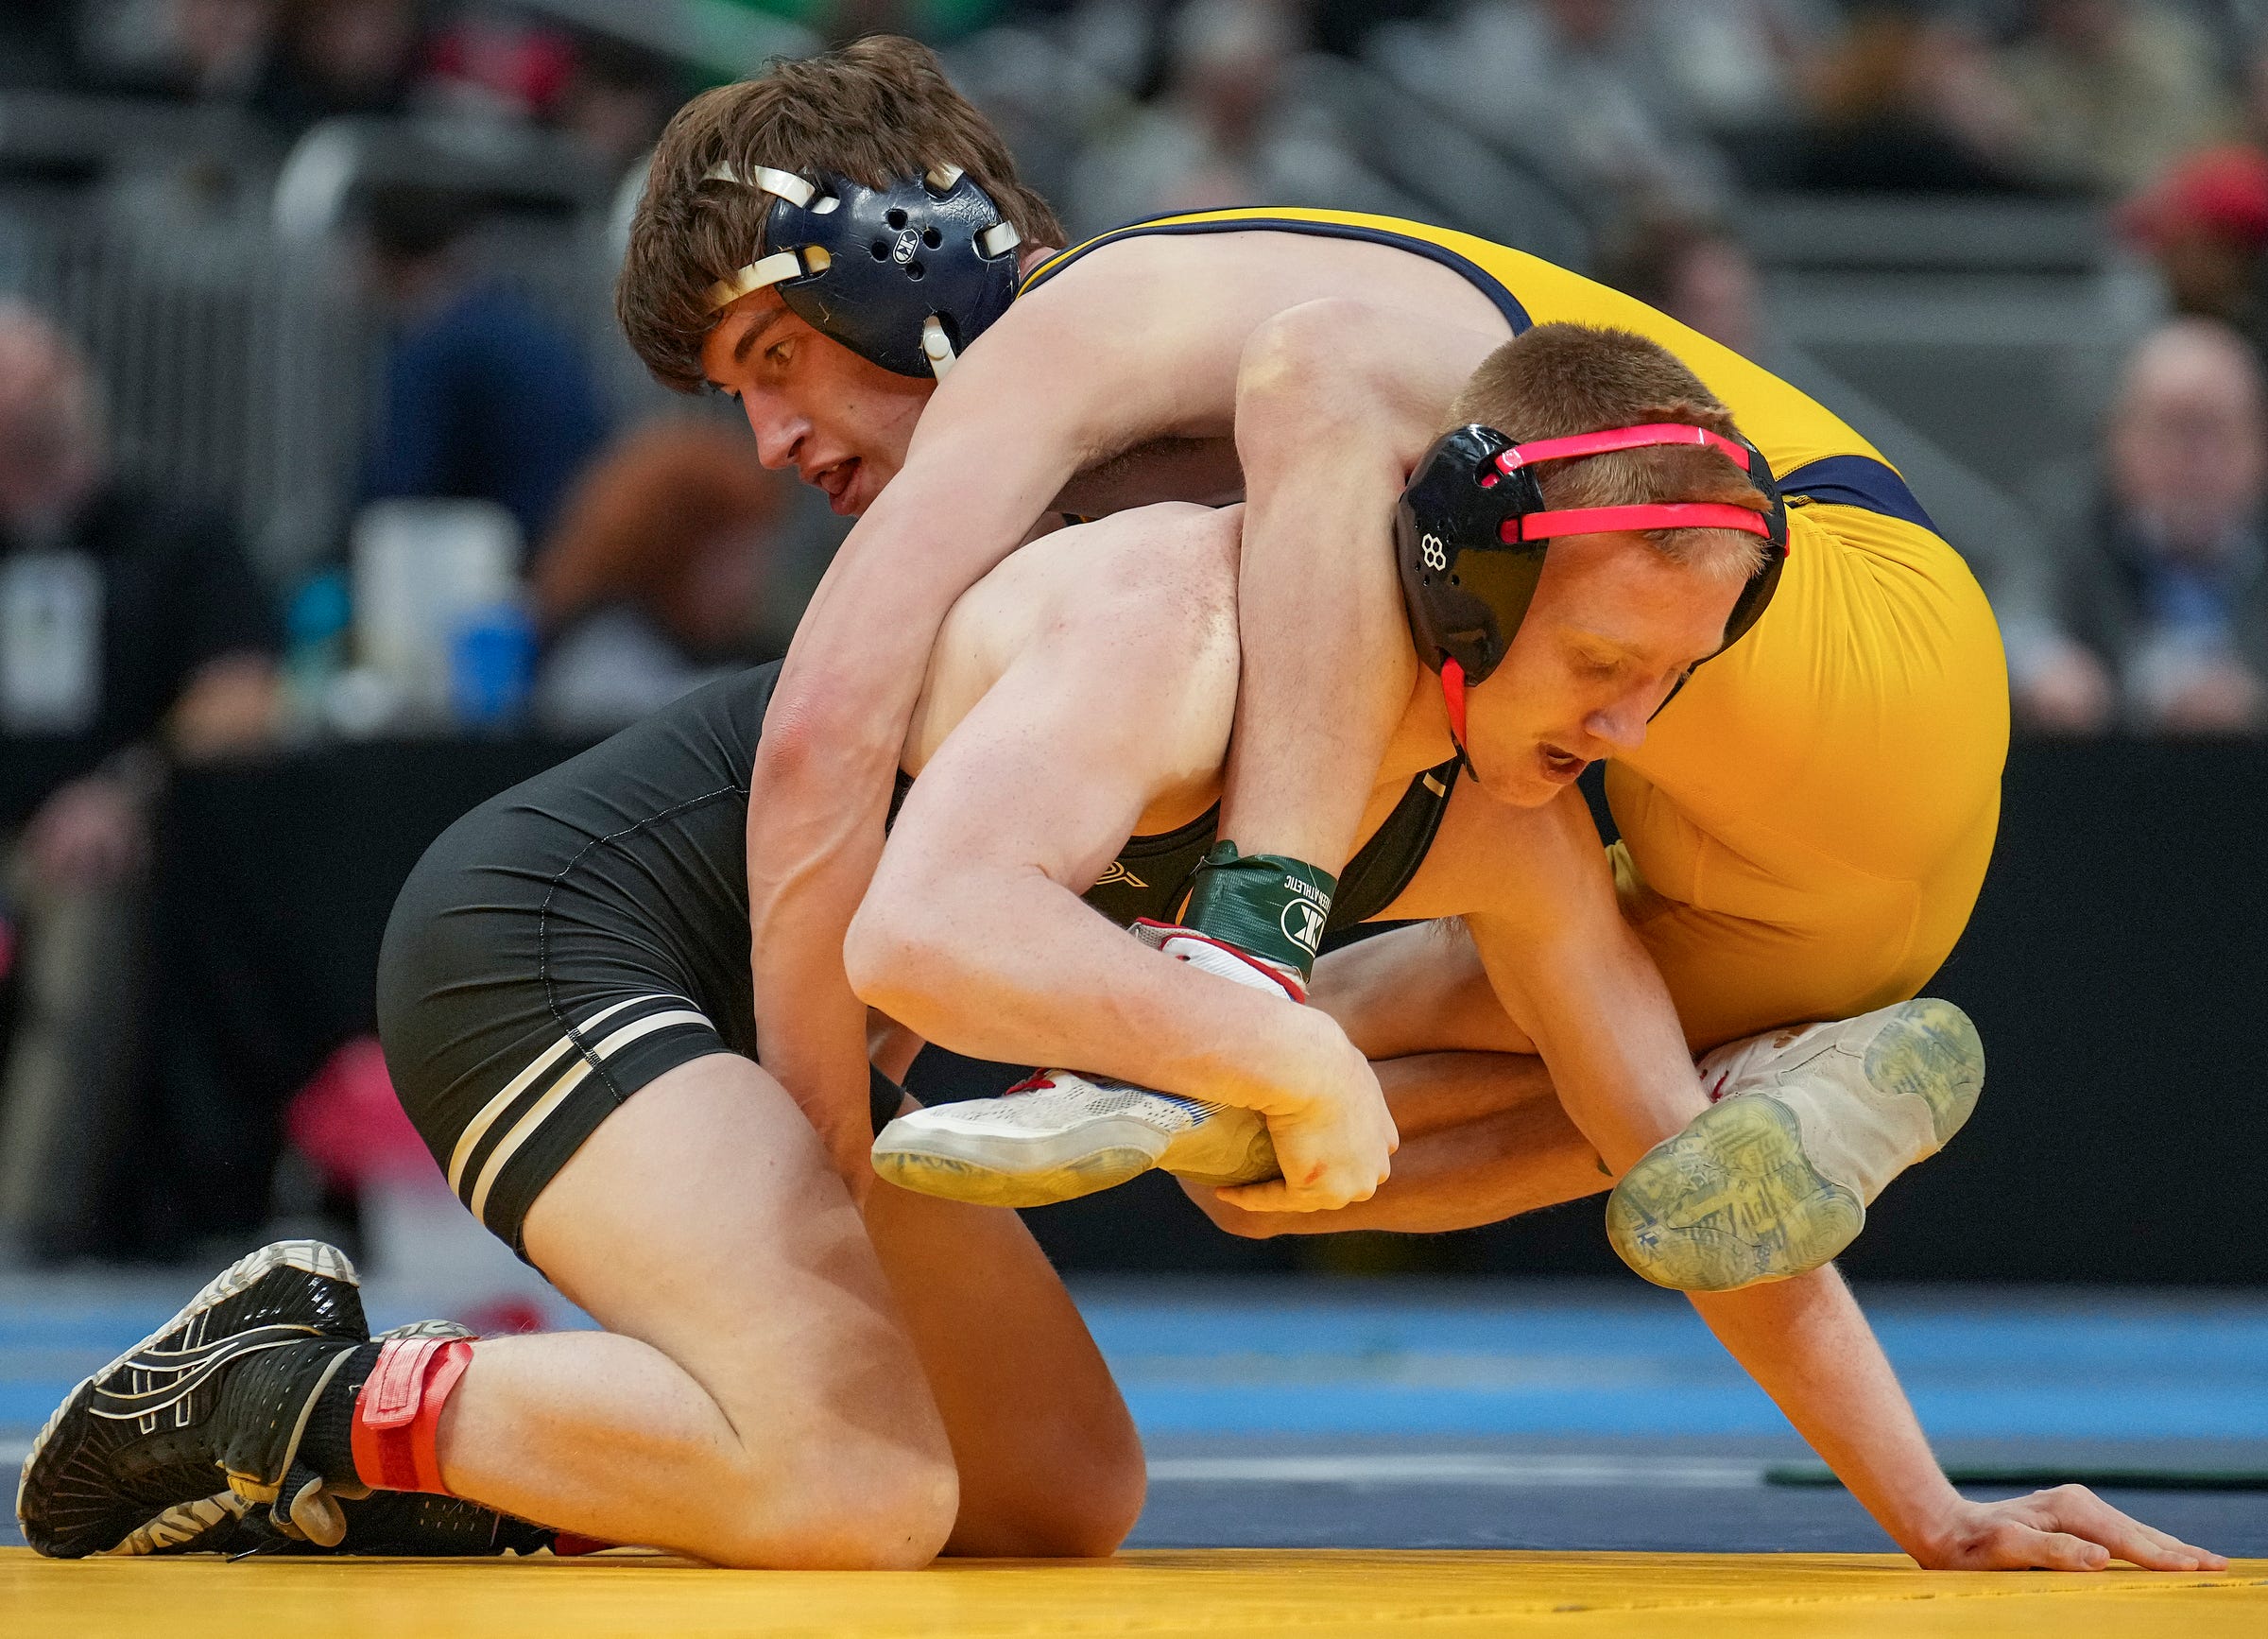 IHSAA wrestling state finals Championship match pairings, highlights